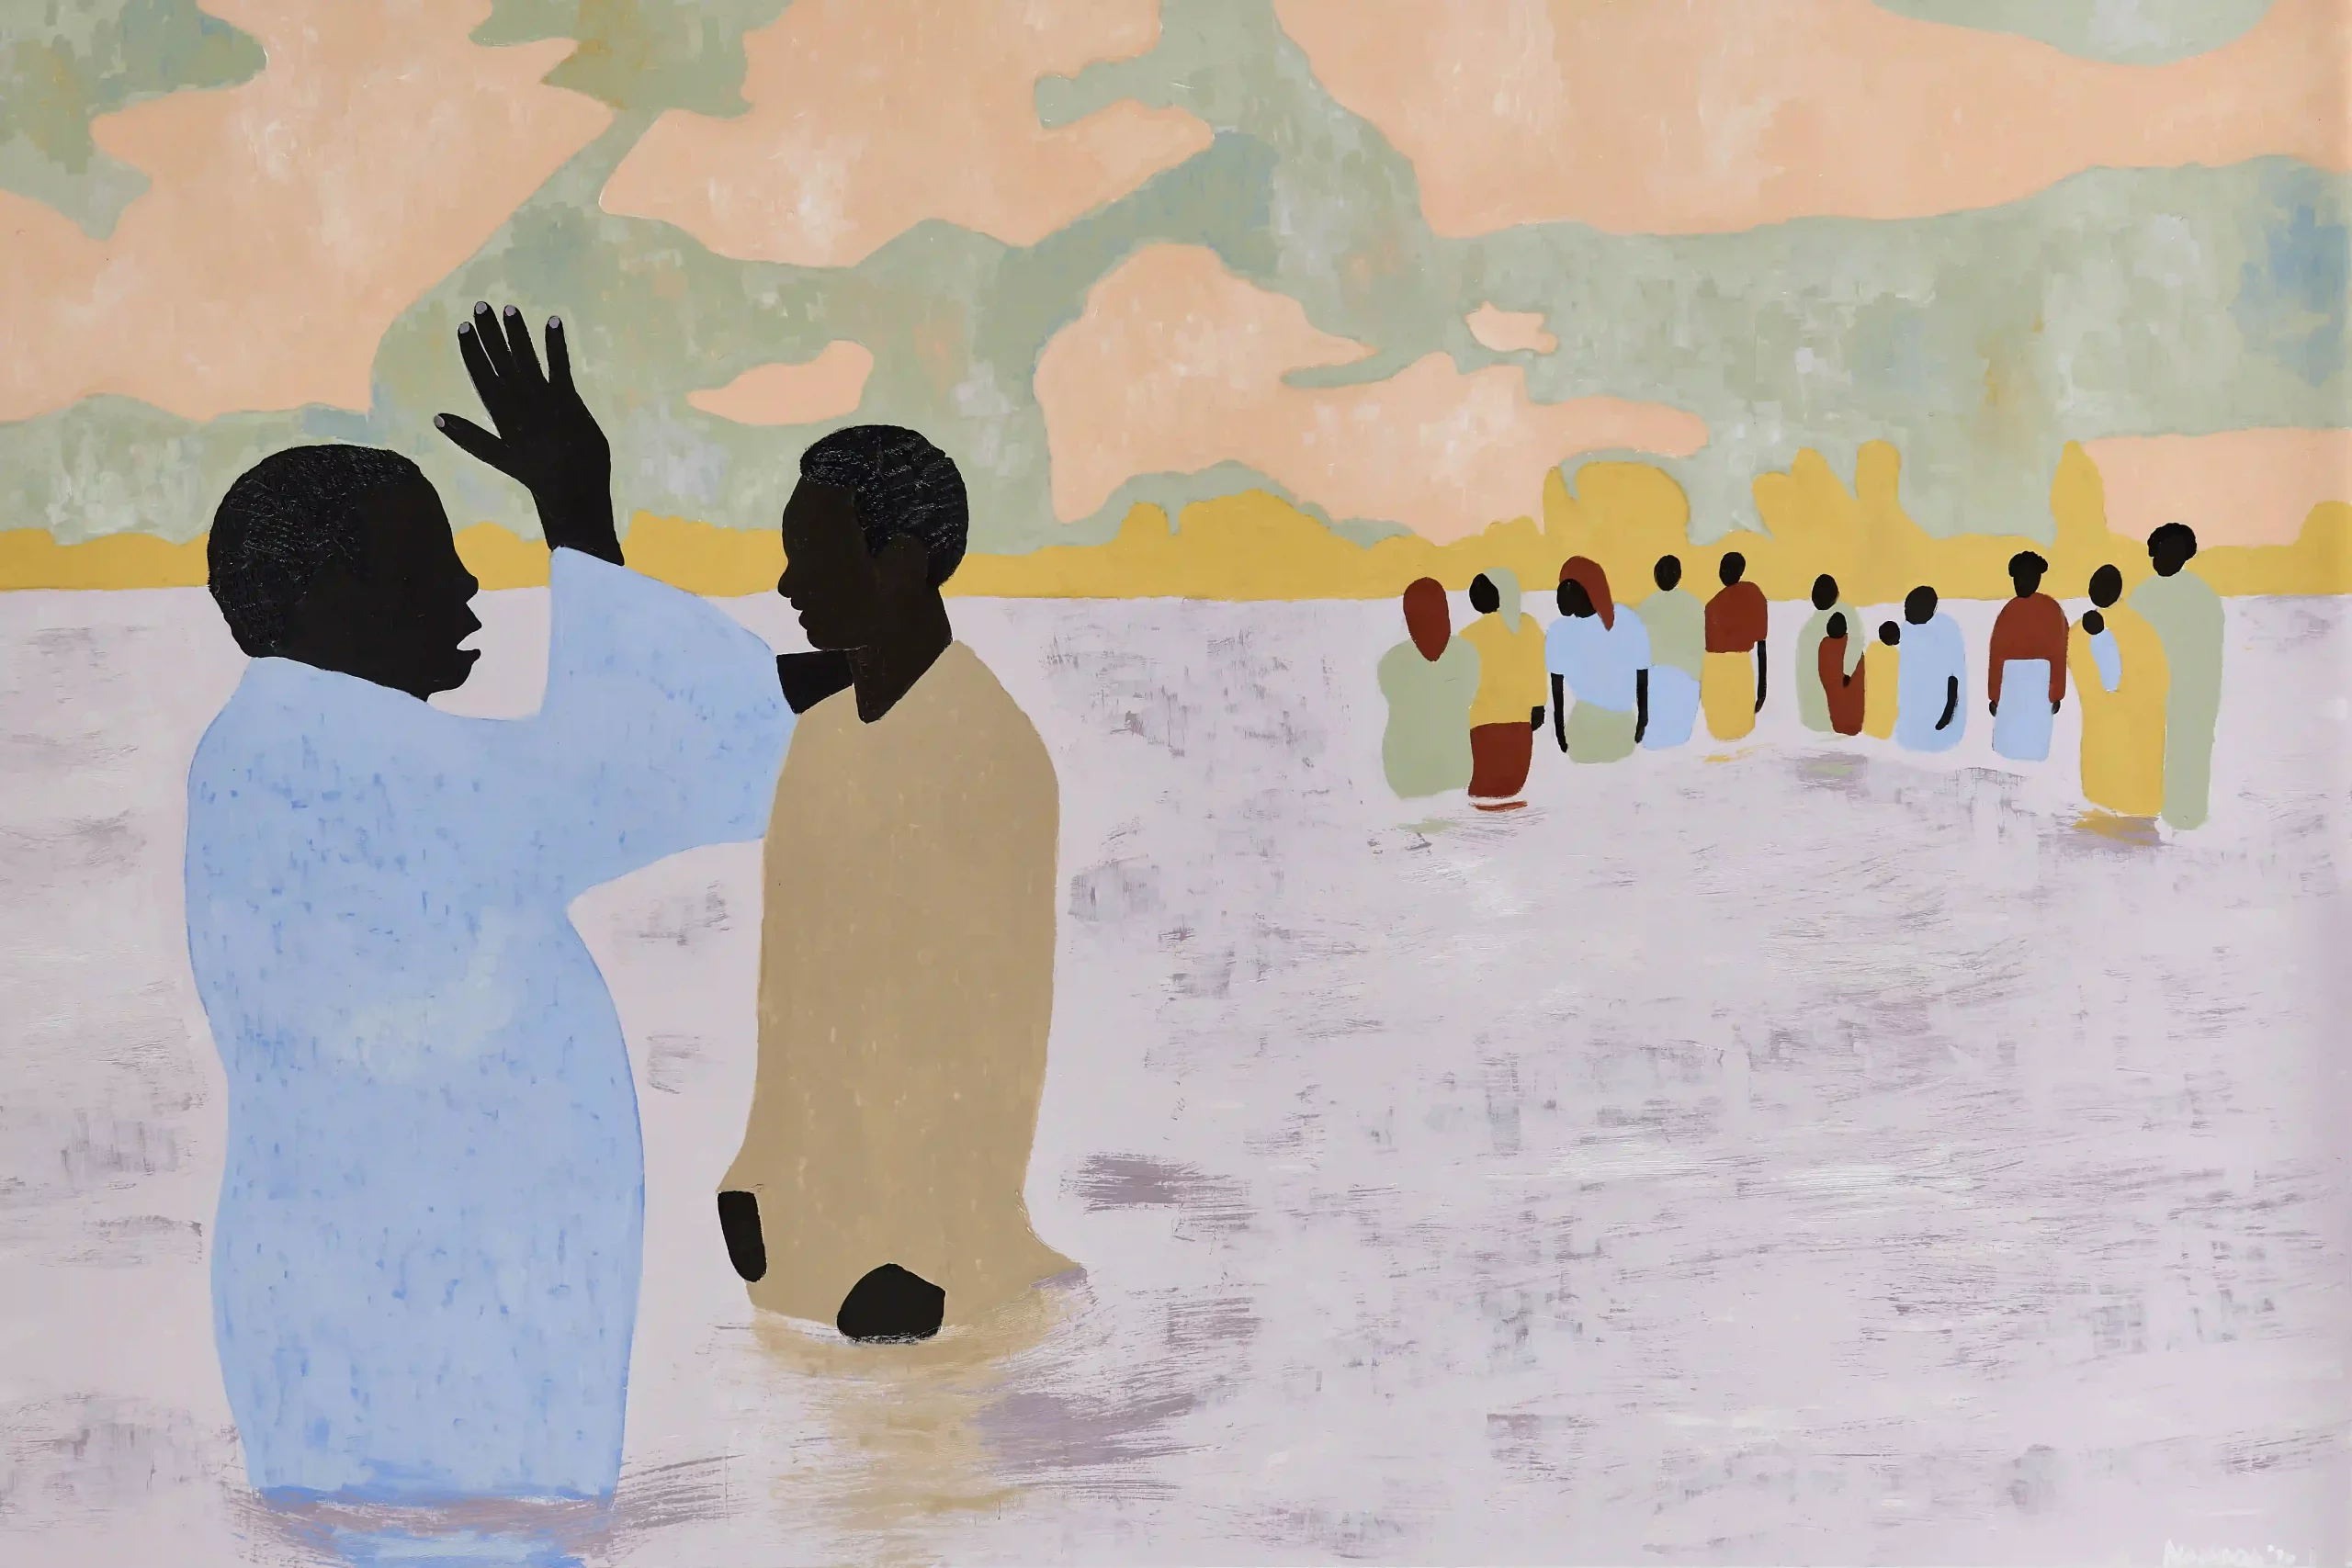 Cassi Namoda, To Live Long Is To See Much (Ritual Bathers III), 2020, Oil on canvas, 152.4 x 233.6cm